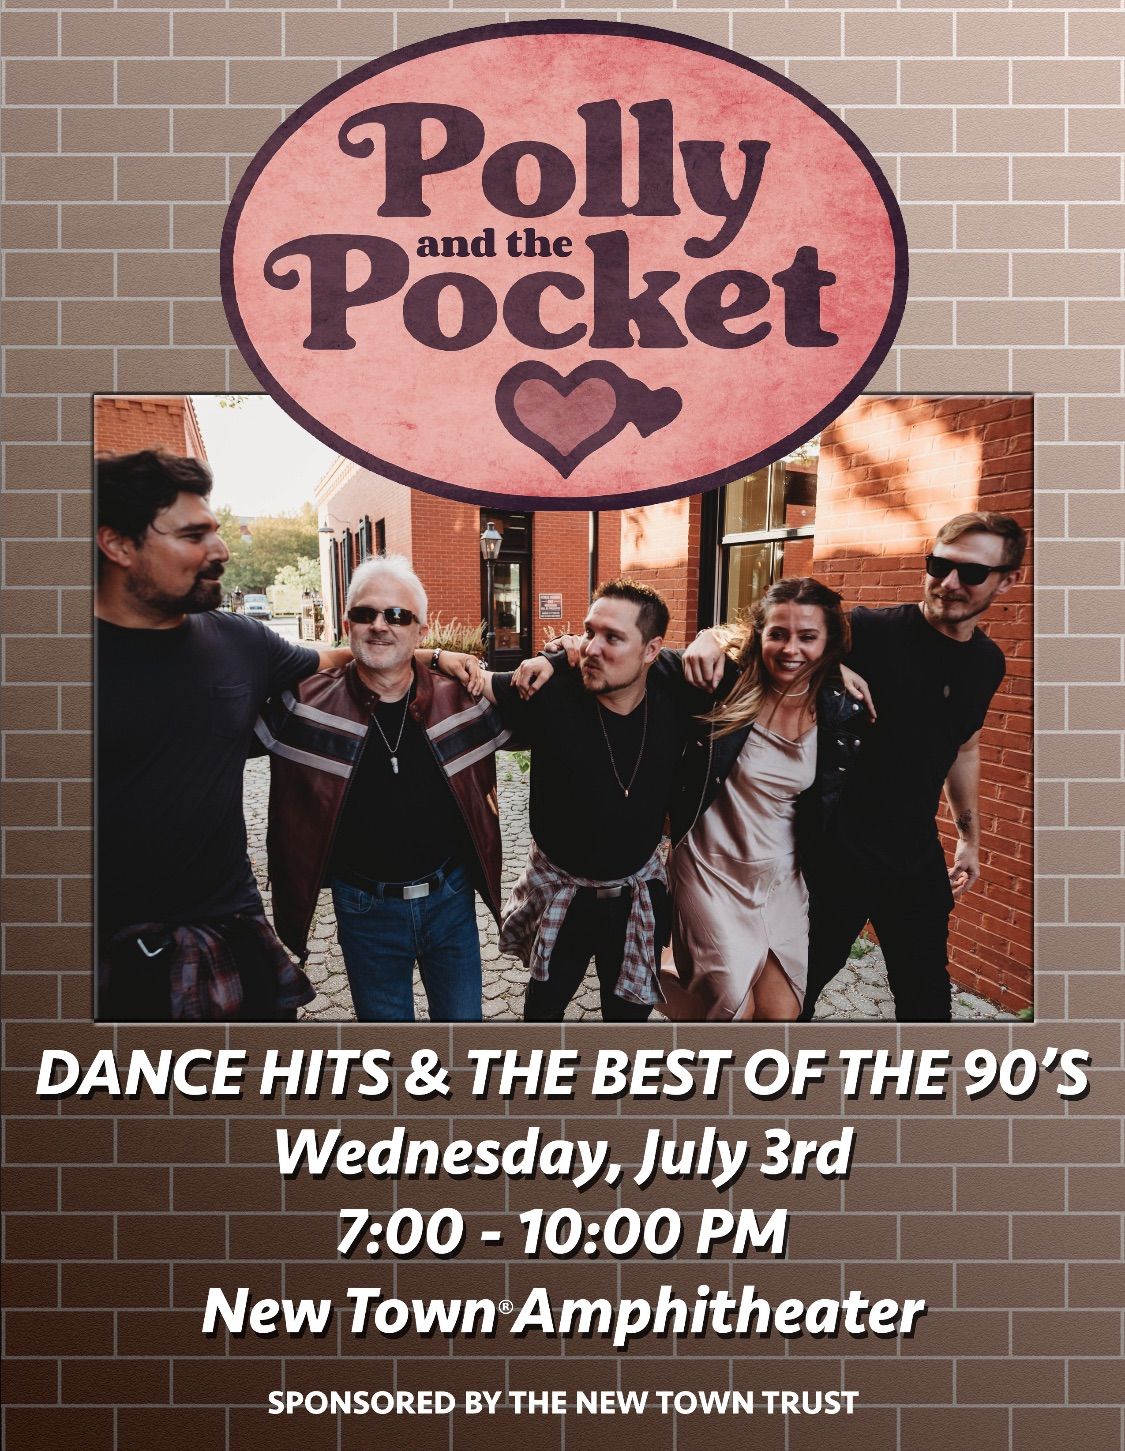 FREE Concert - Polly & the Pocket